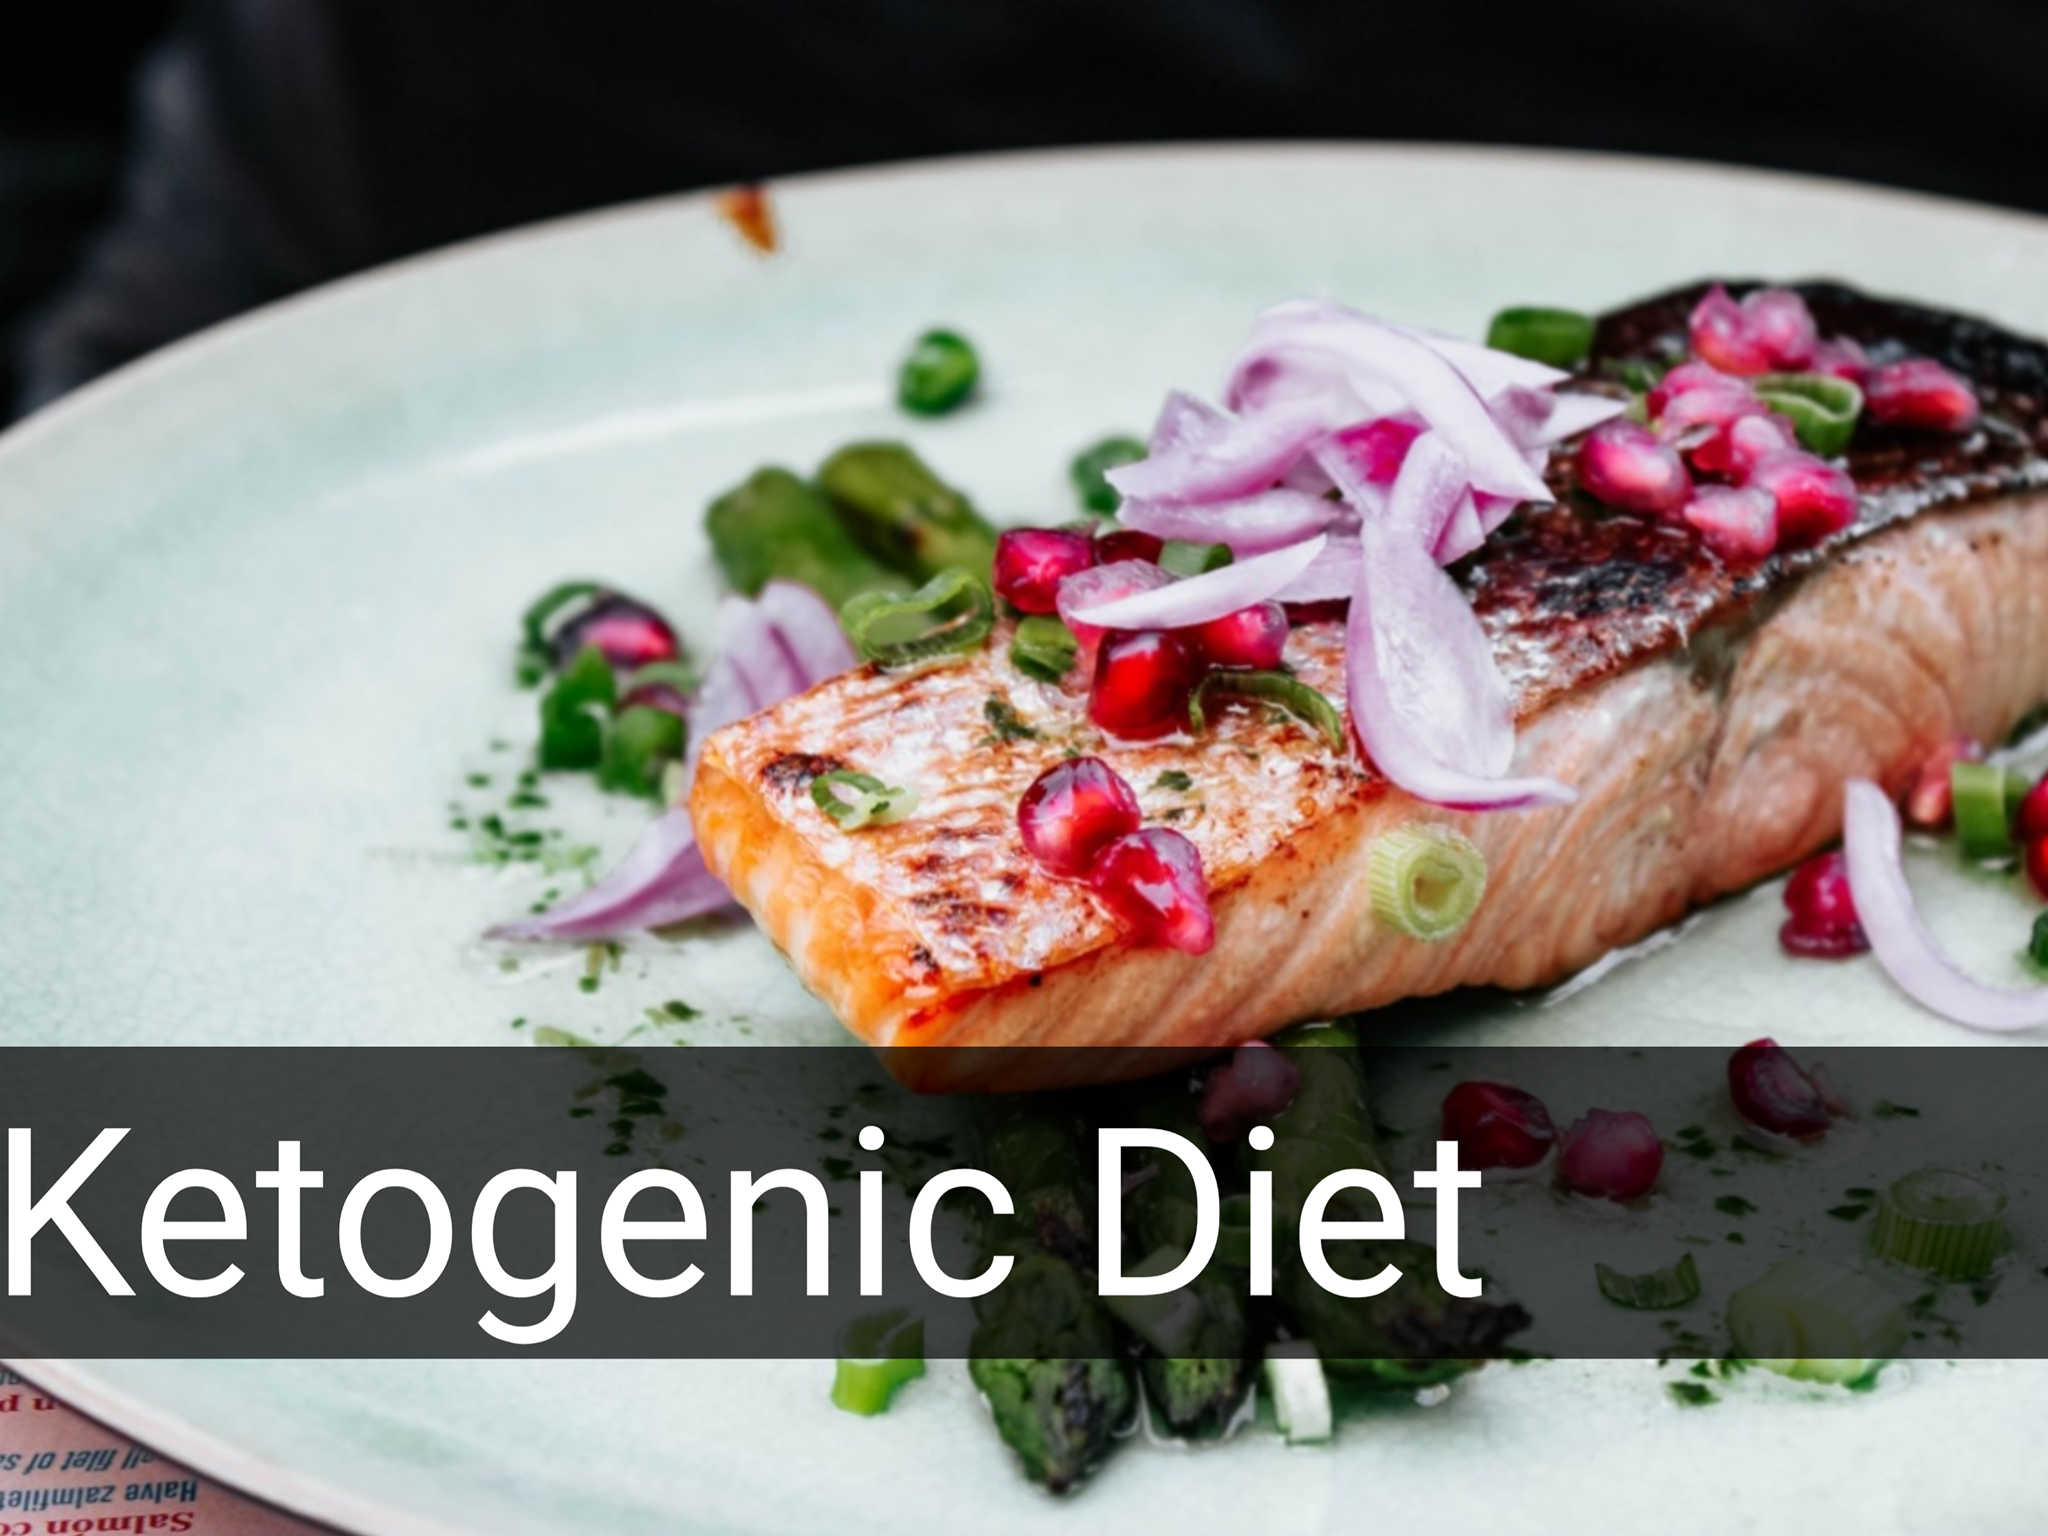 Ketogenic Diet: a way to Decrease glucose consumption & utilize body fats